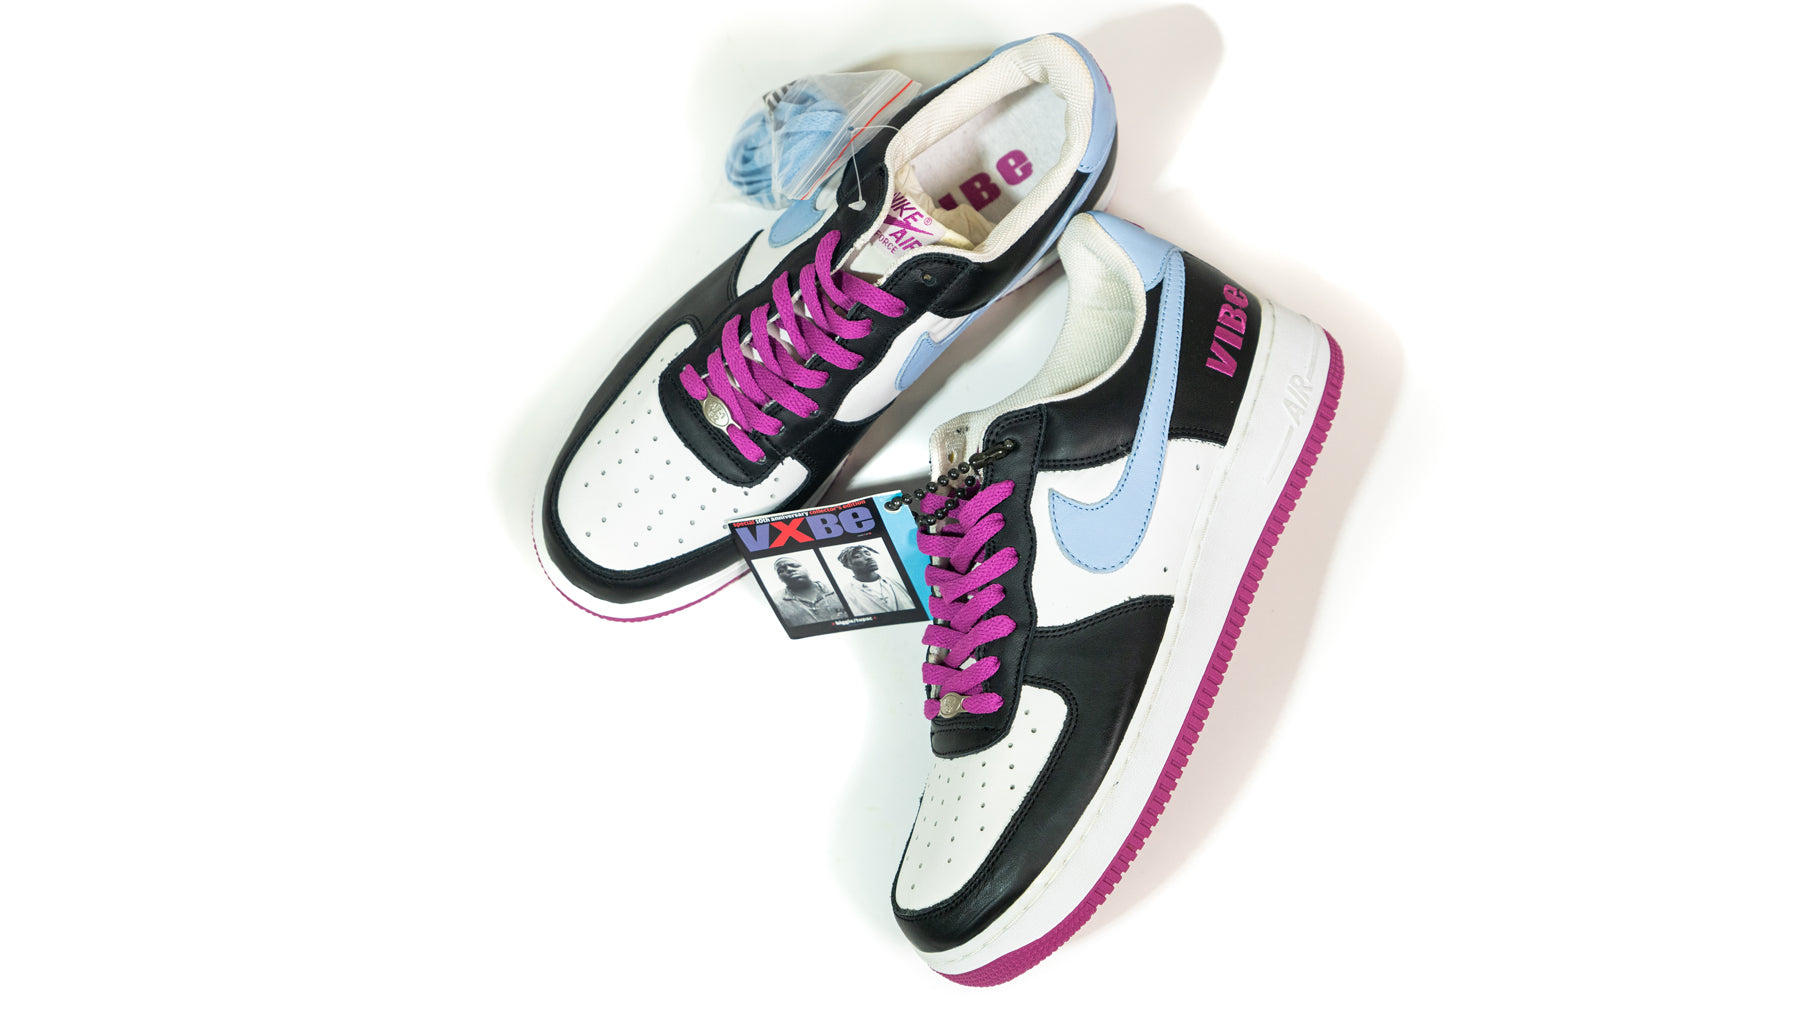 ARCHIVE DNA: NIKE AIR FORCE 1 X VIBE MAGAZINE HYPERSTRIKE – Patta